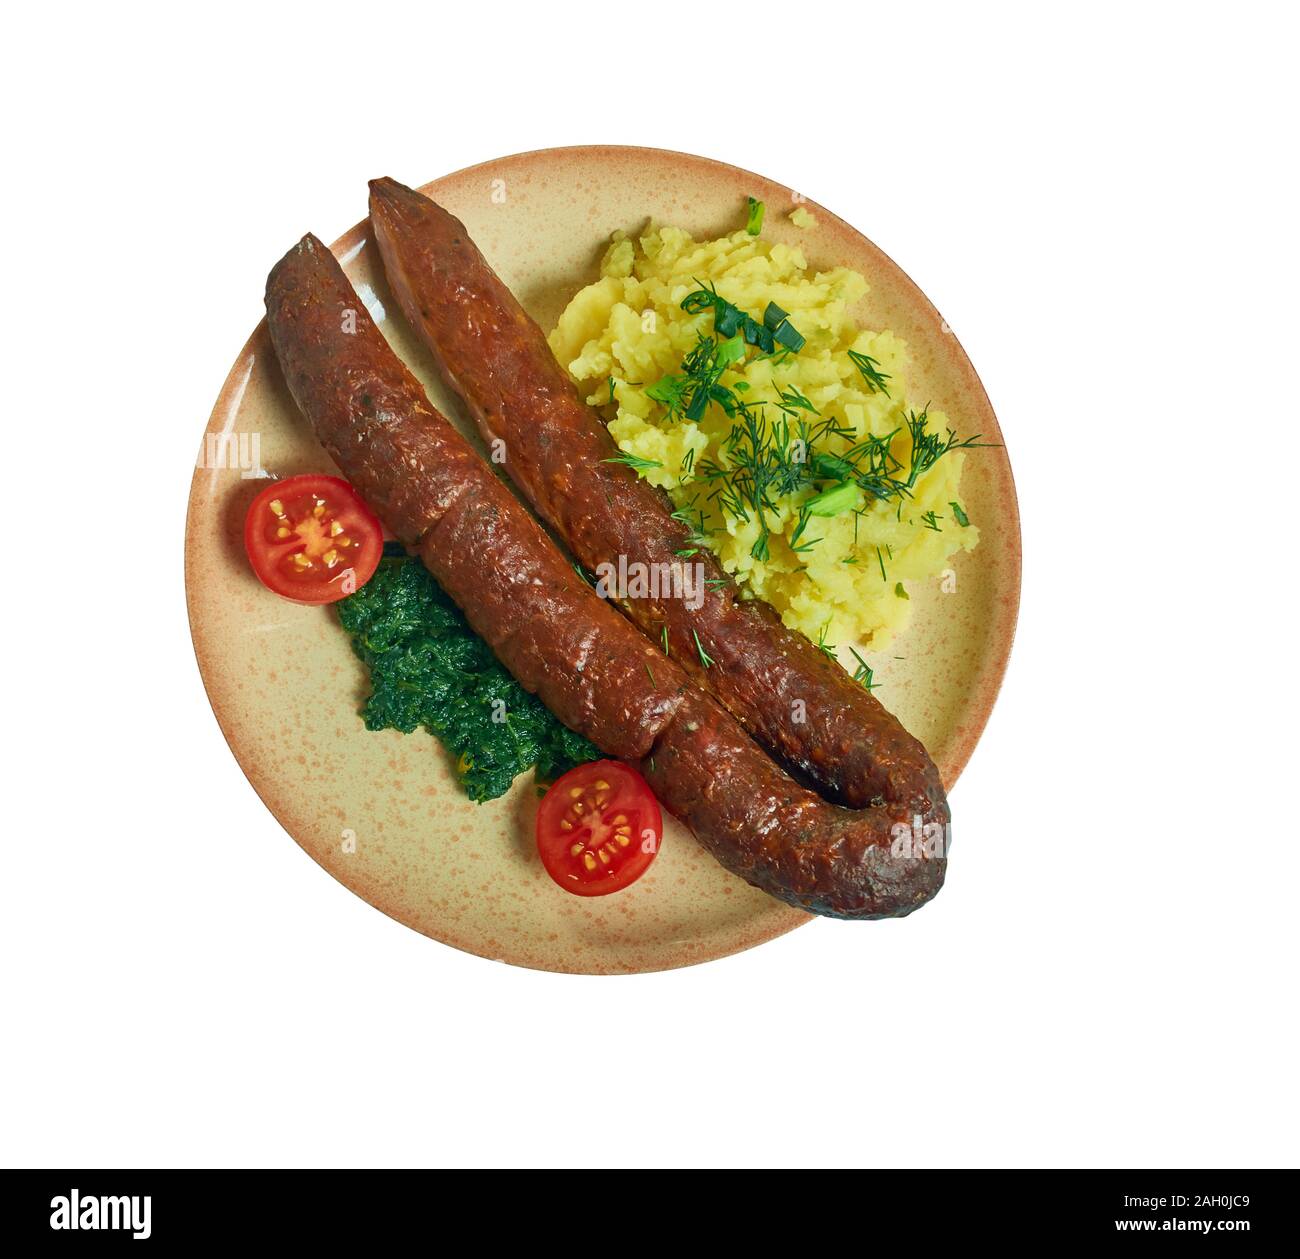 Bregenwurst,  specialty sausage of Lower Saxony and Saxony-Anhalt traditionally made of pork, pork belly, and pig or cattle brain Stock Photo